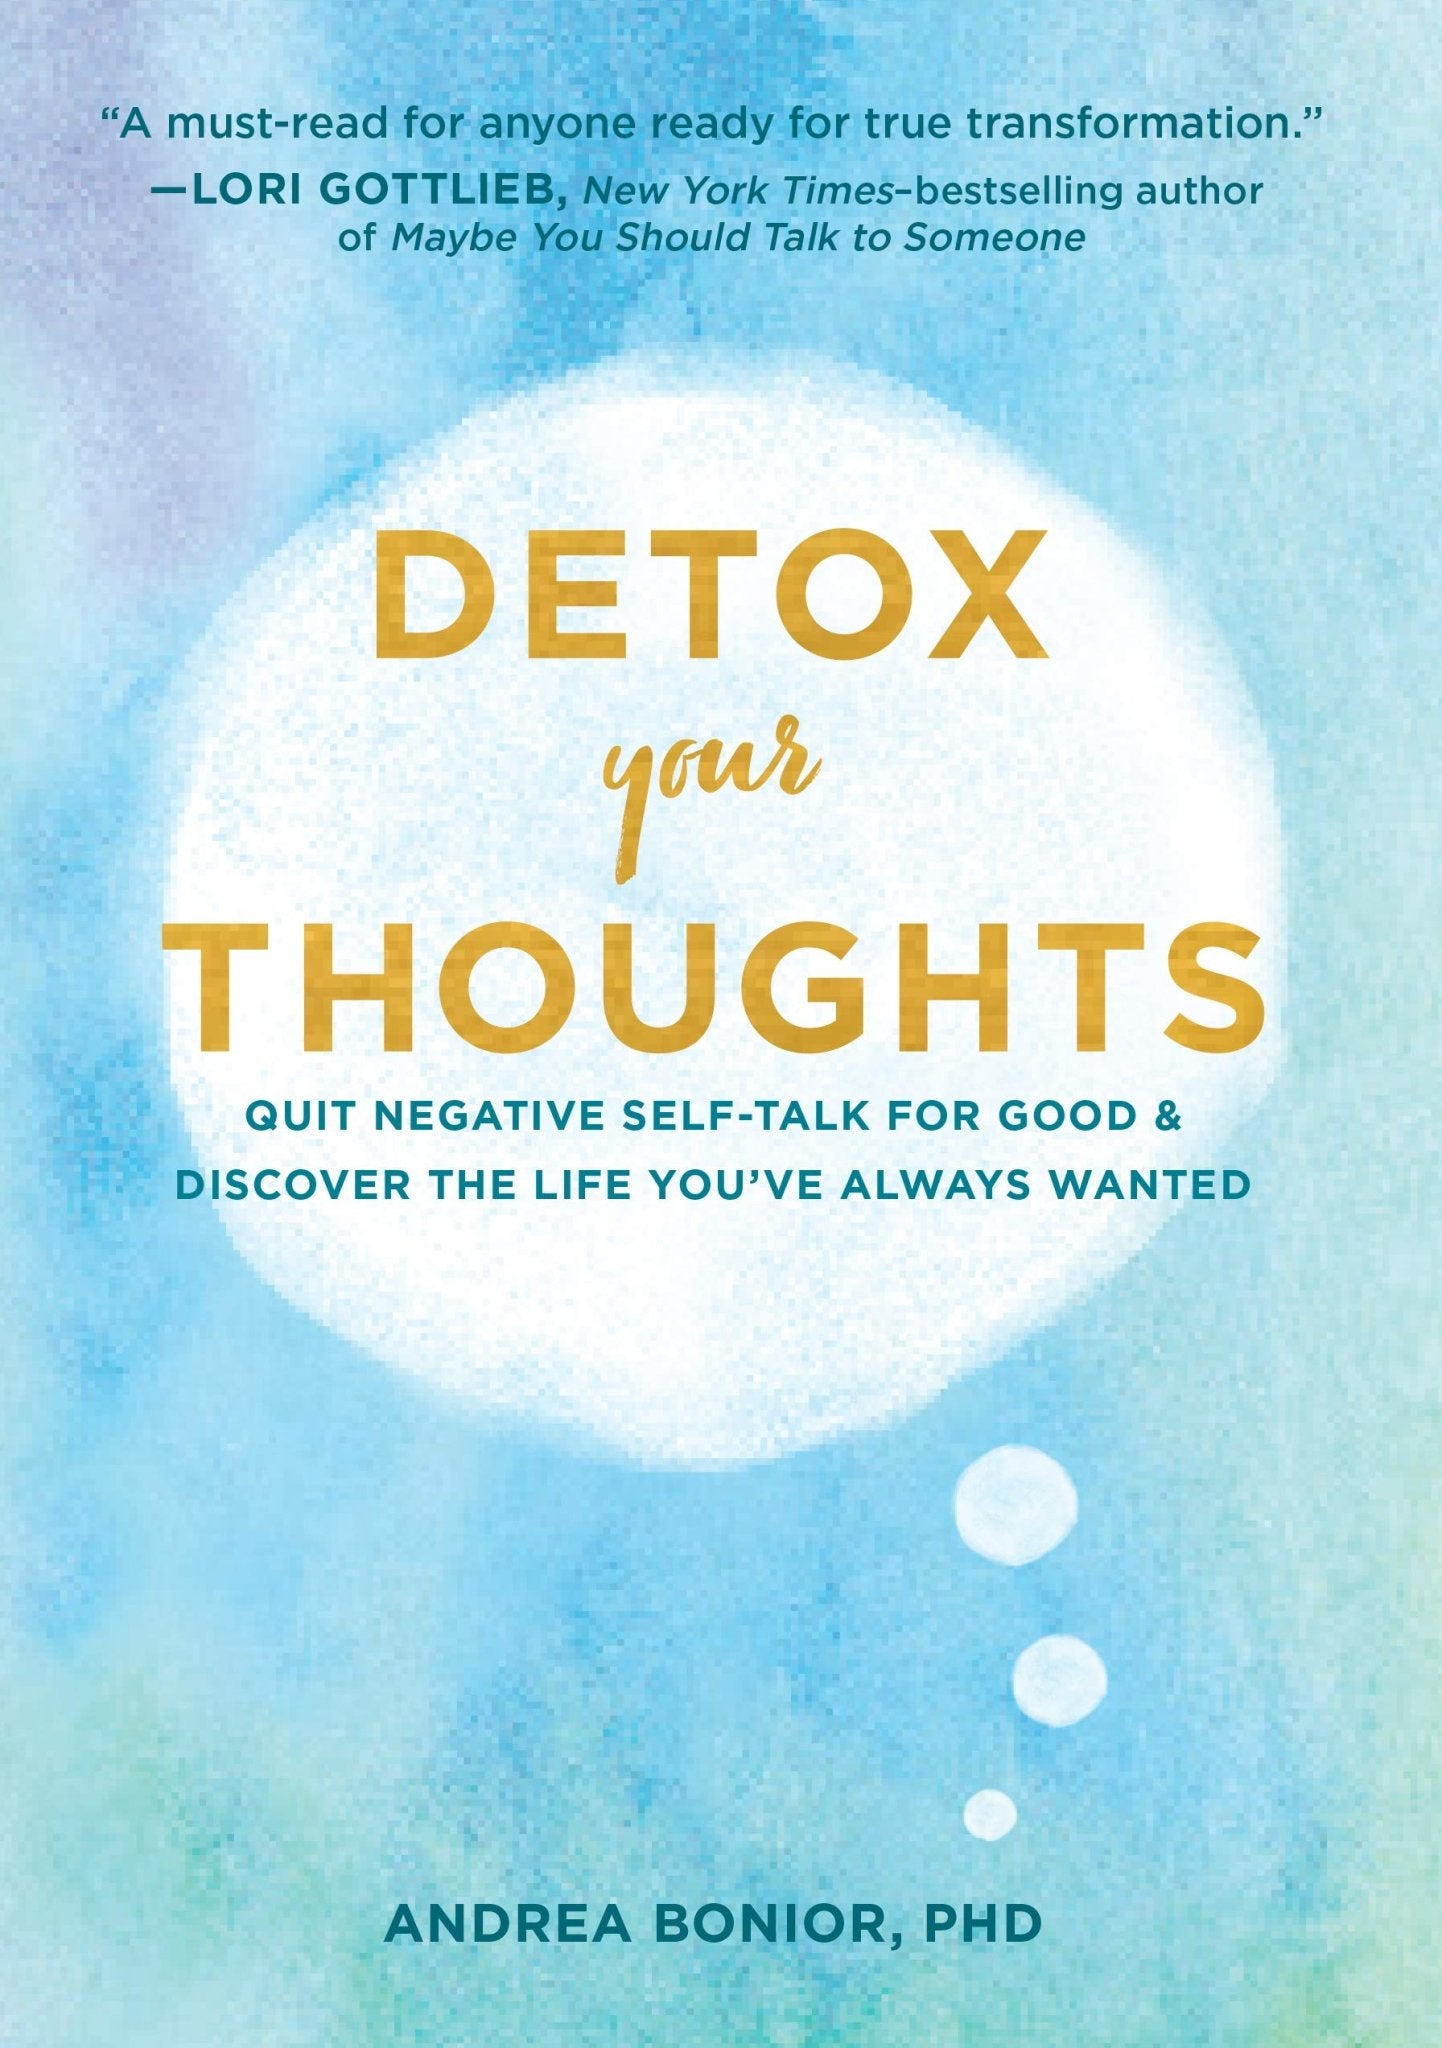 Detox Your Thoughts Quit Negative Self-Talk for Good and Discover the Life You've Always Wanted - Spiral Circle